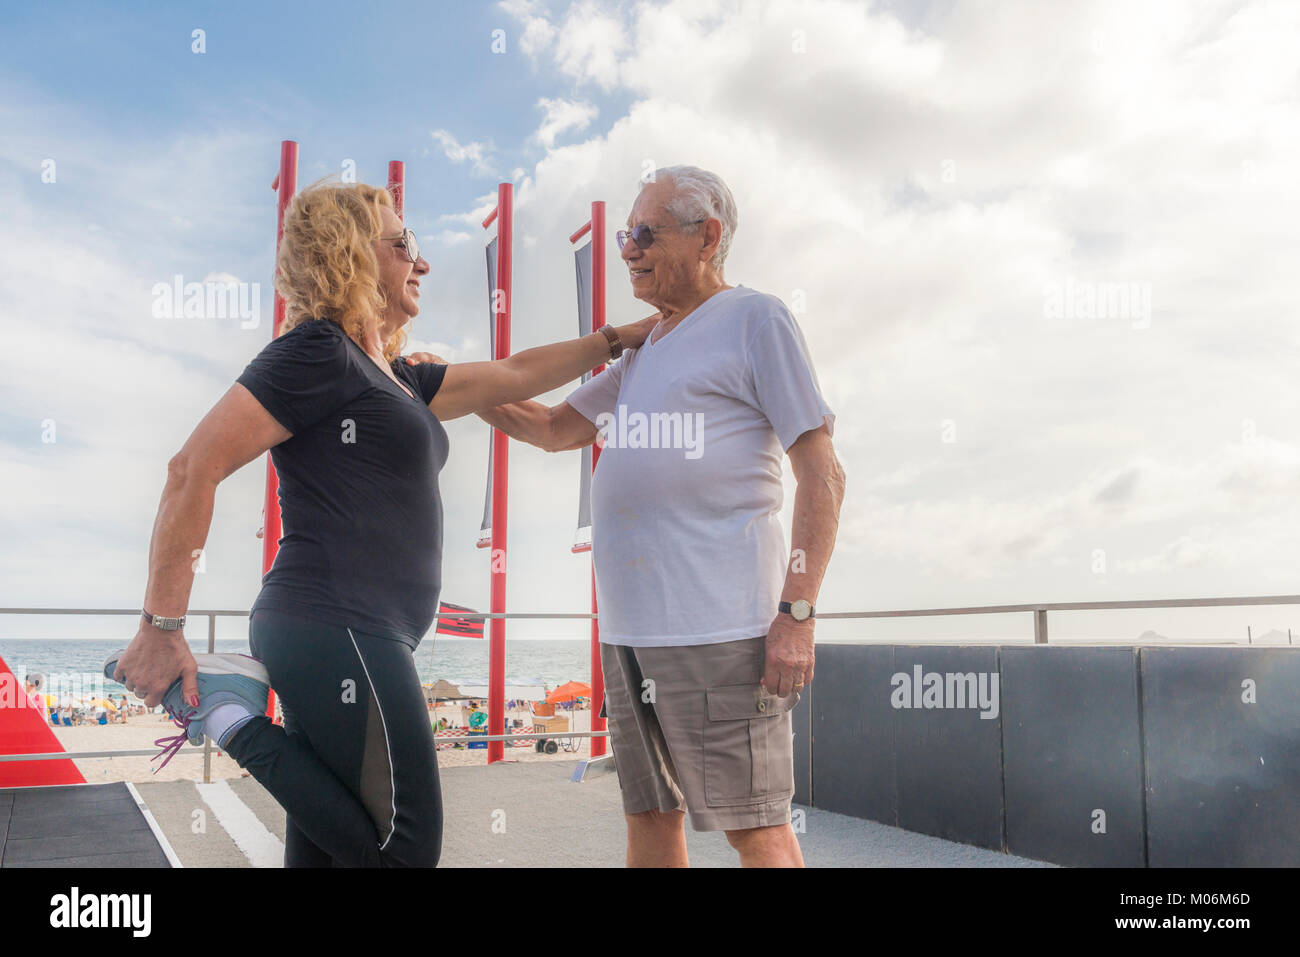 Model Released - Mature heterosexual couple exercising together. Man supporting woman while she stretches her quadriceps Stock Photo